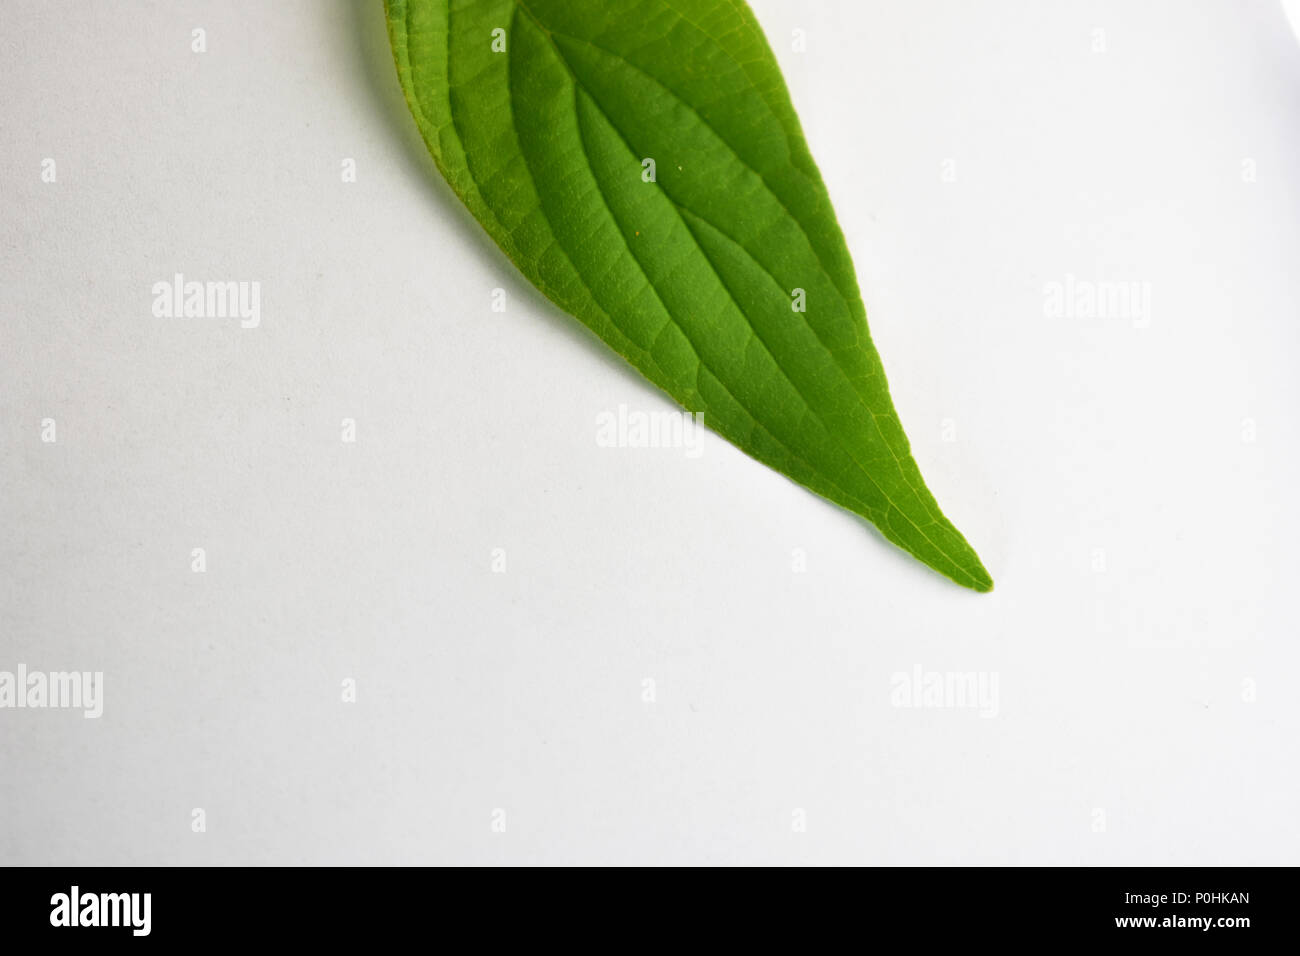 Bright green leafs background. Stock Photo